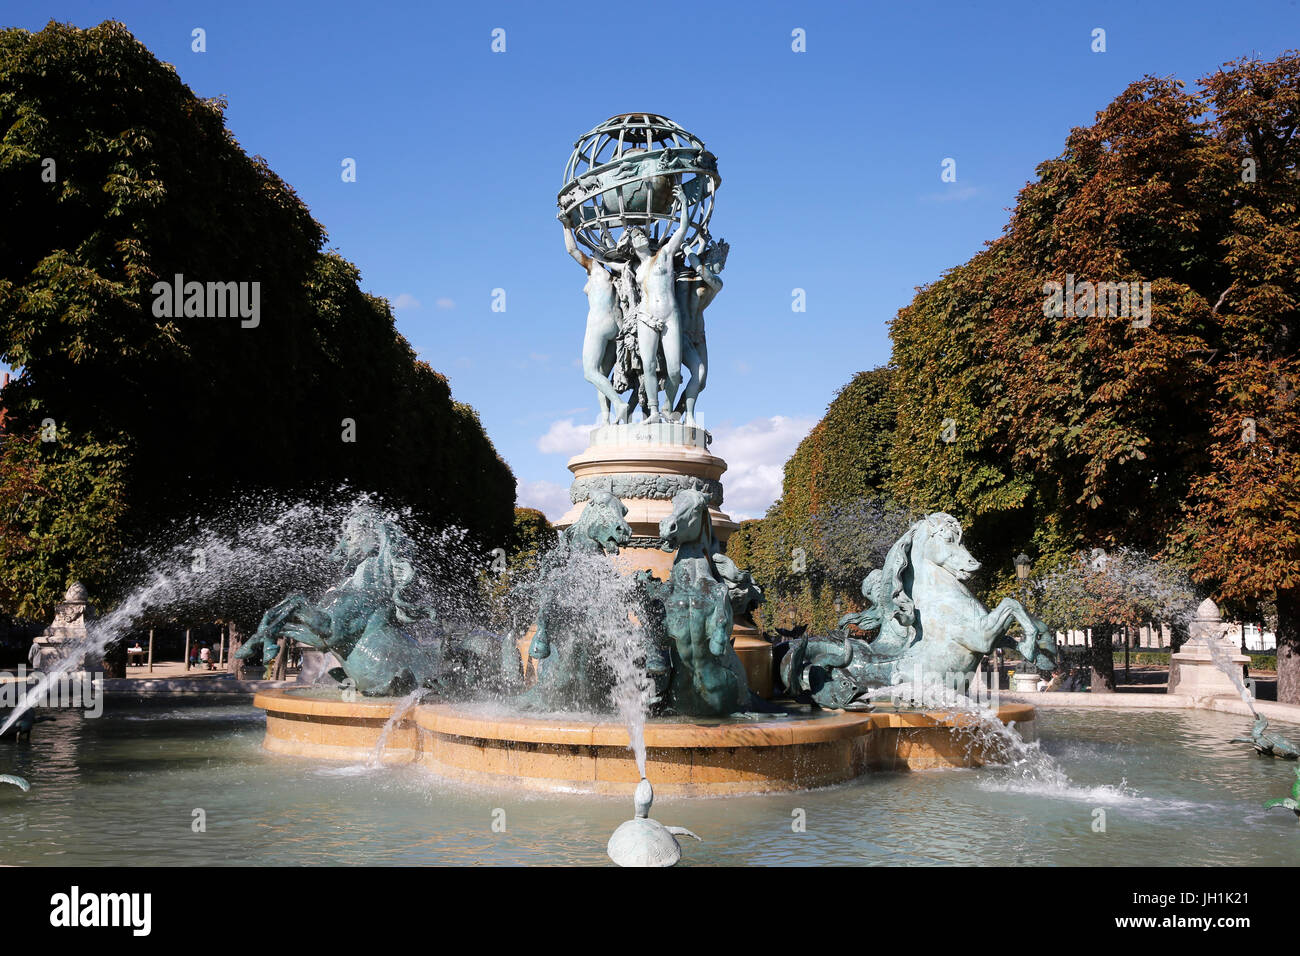 The Great Explorers' Garde, Paris. 'The 4 parts of the world' bronze fountain designed by Carpeaux and sculpted by Davioud in 1875. France. France. Stock Photo